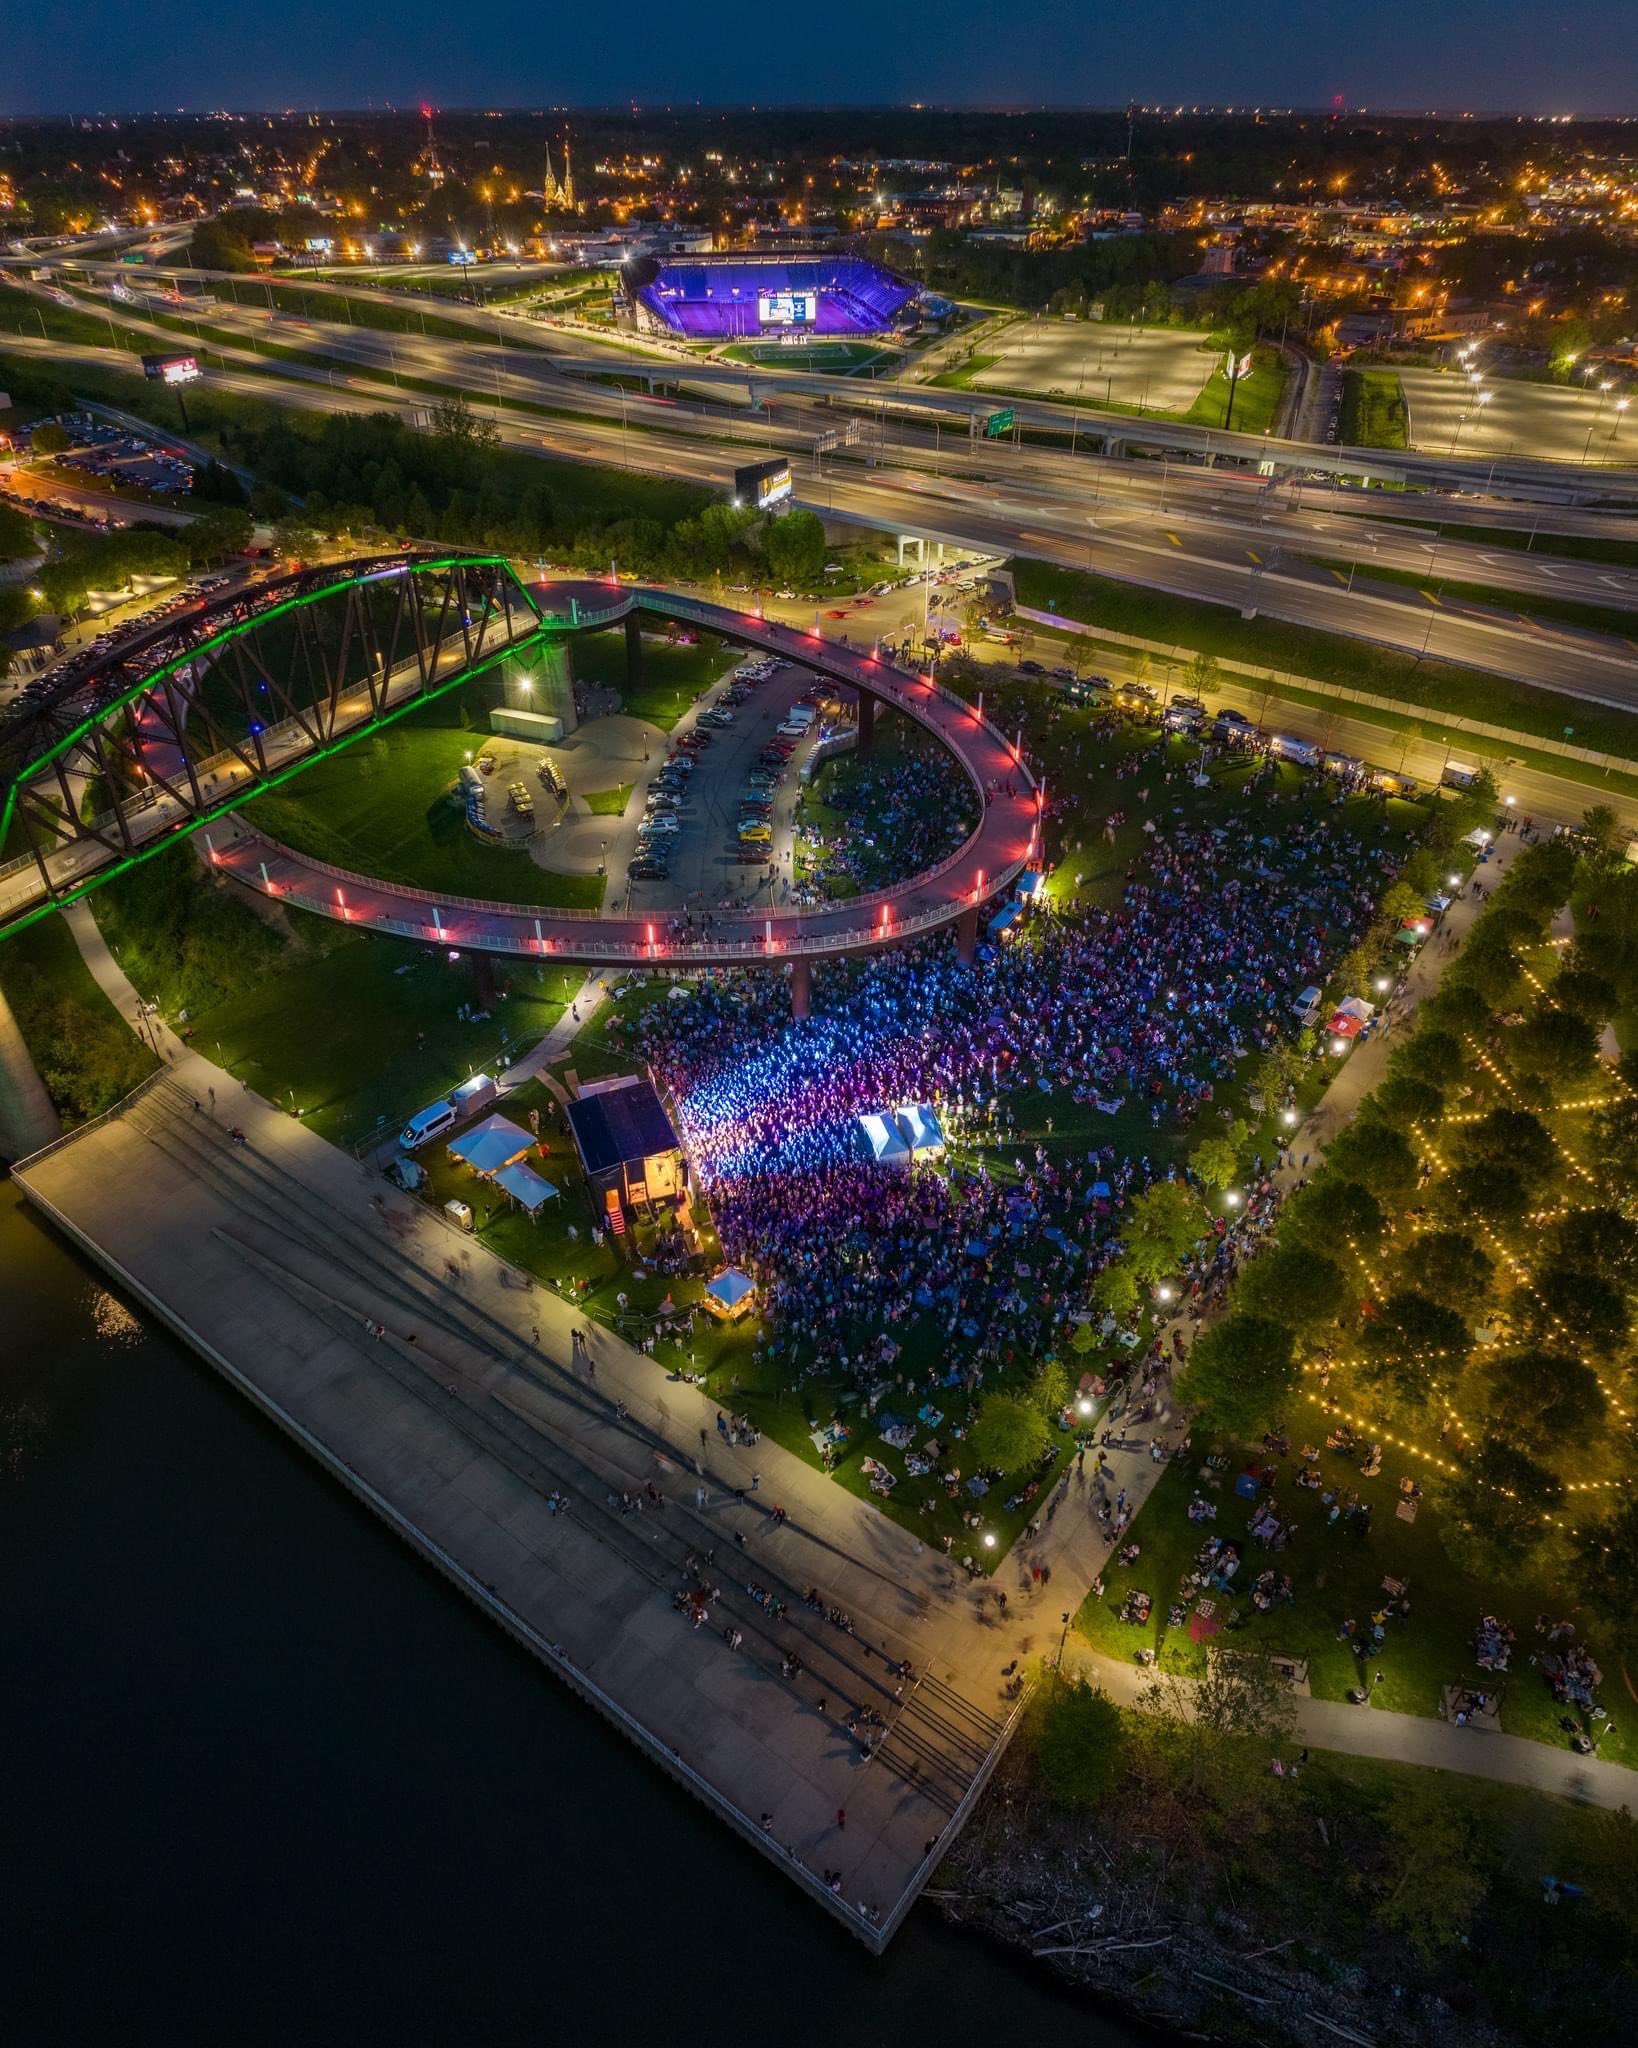 91.9 WFPK and Waterfront Park Announce the 20th Season of WFPK